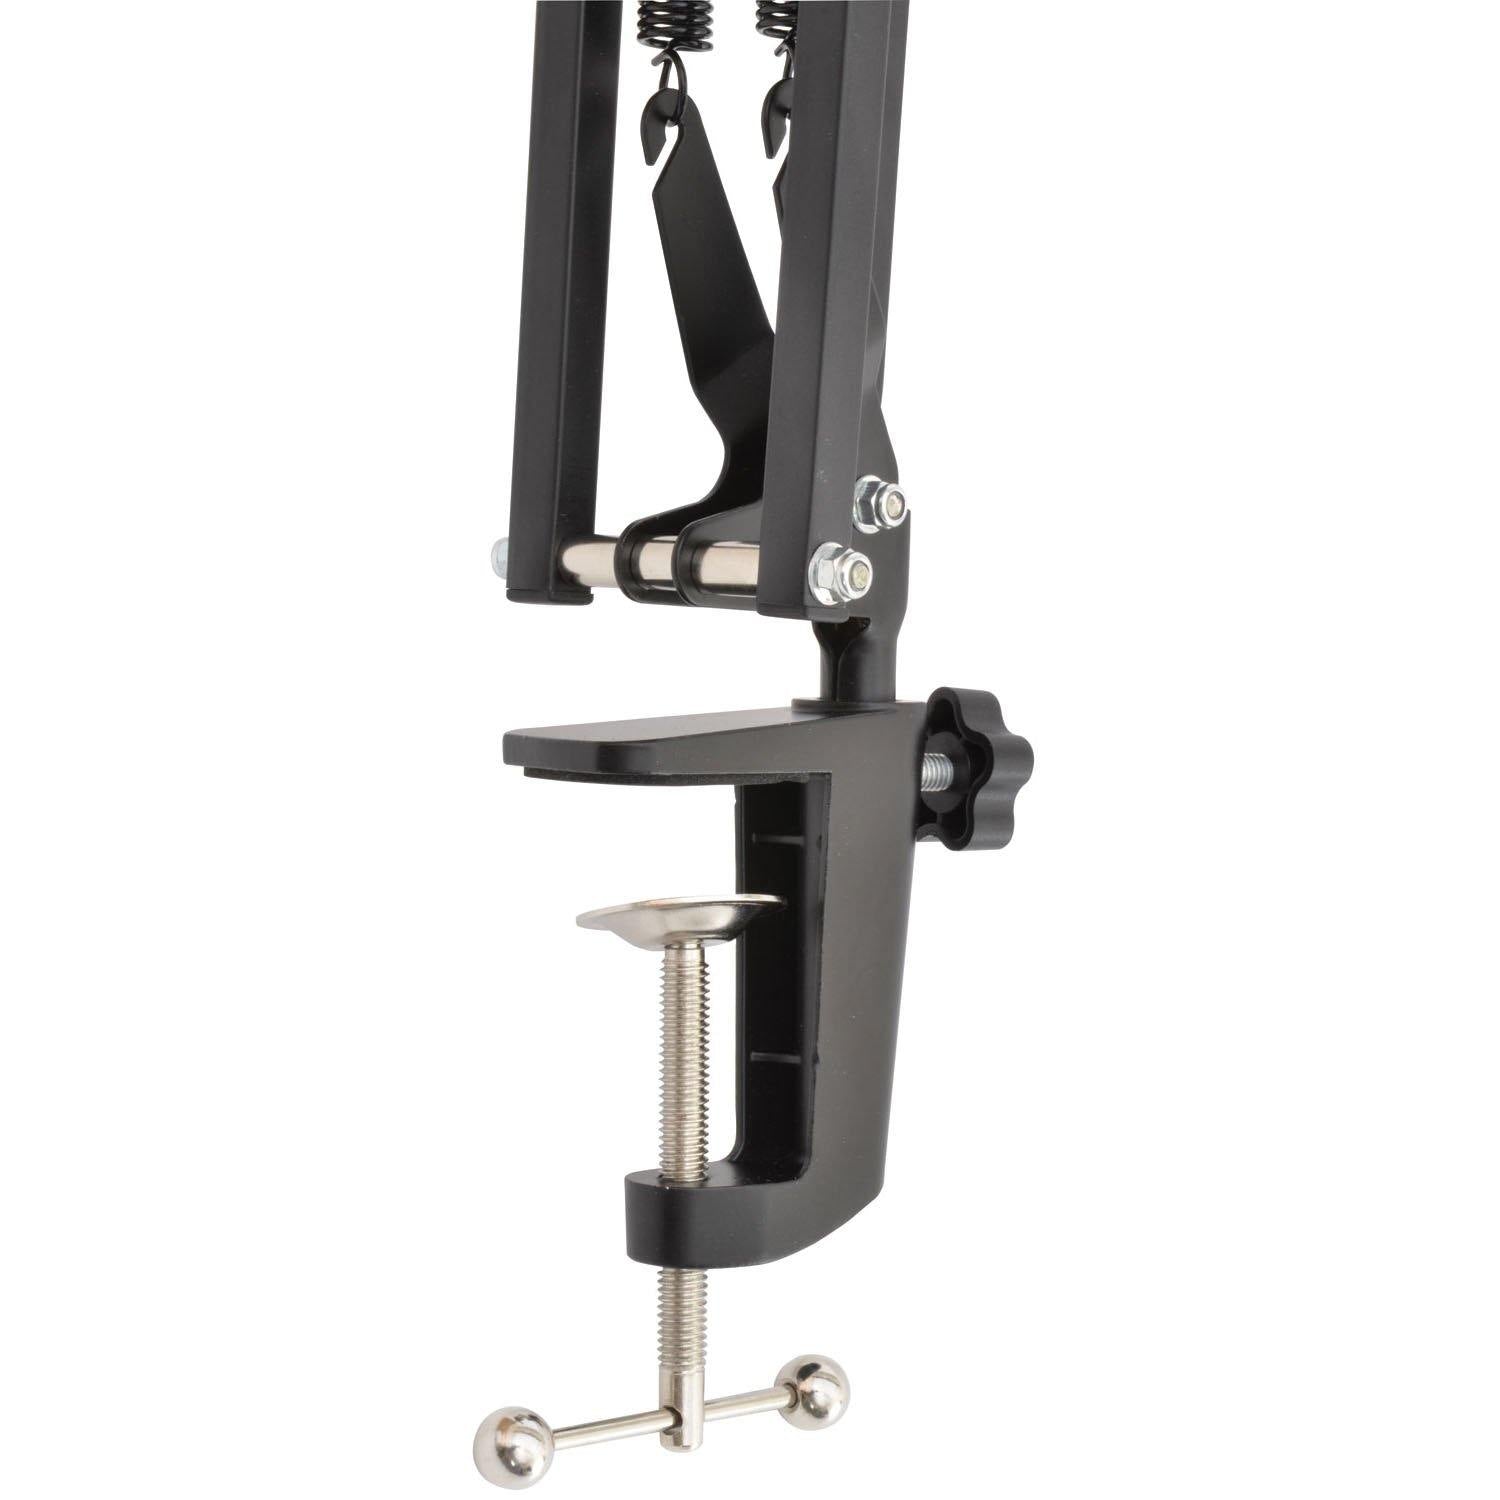 Citronic Large studio microphone desk stand - DY Pro Audio